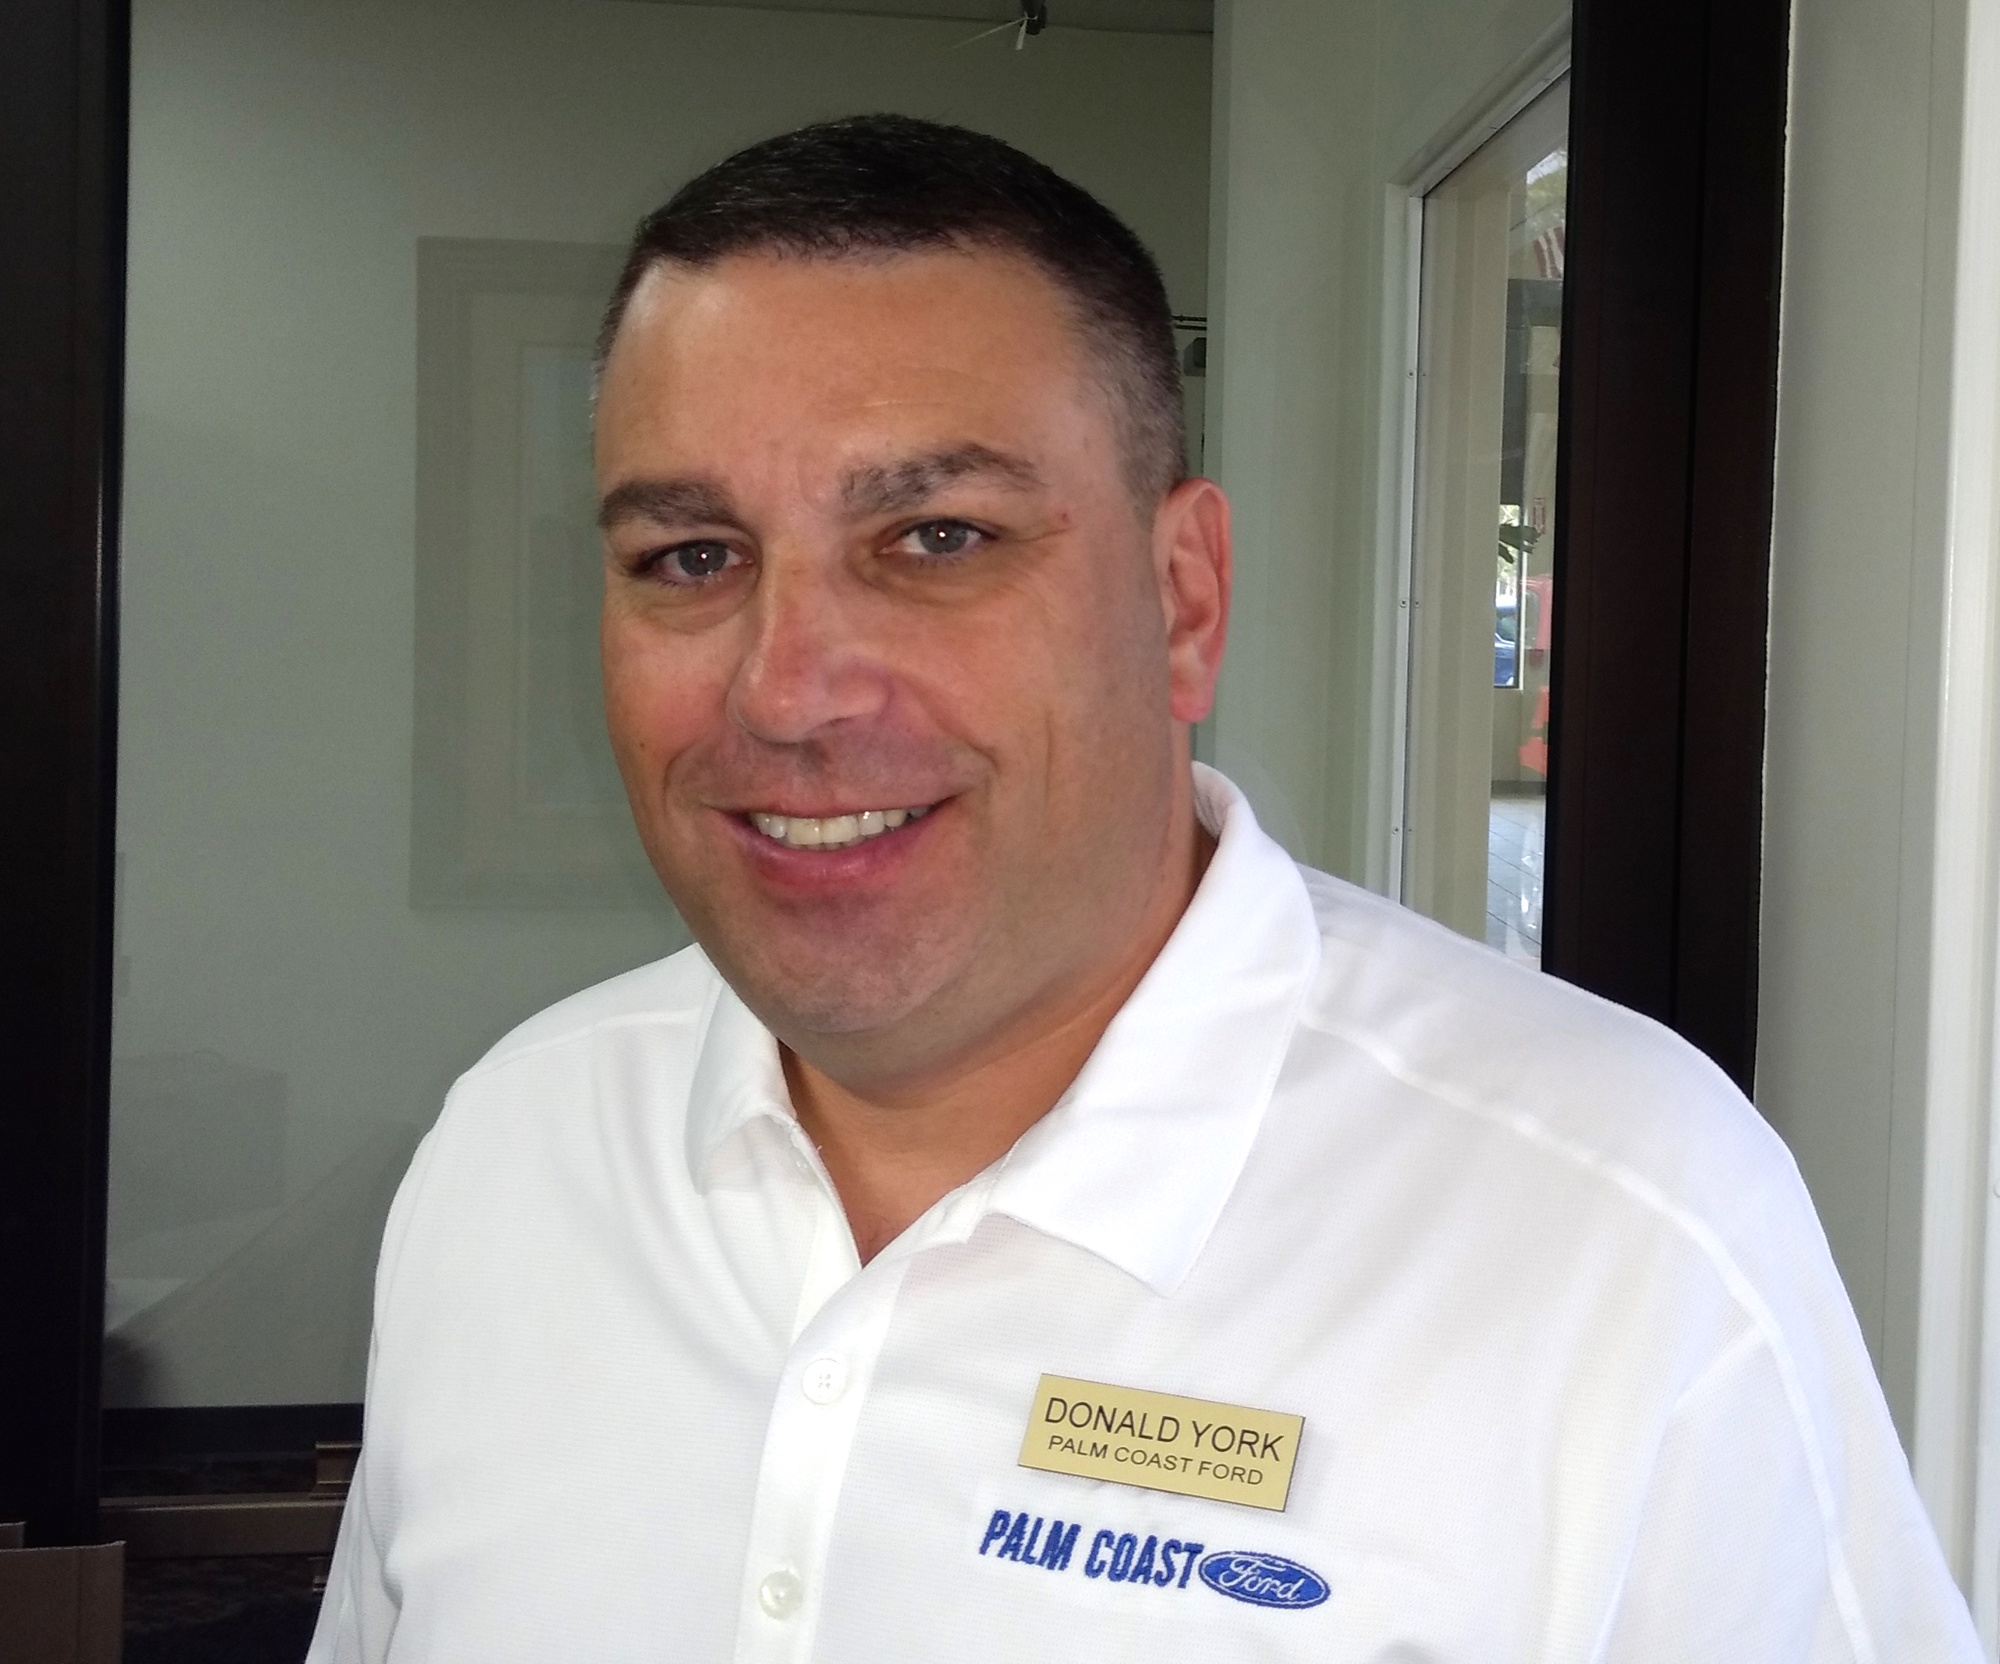 Don York, general manager